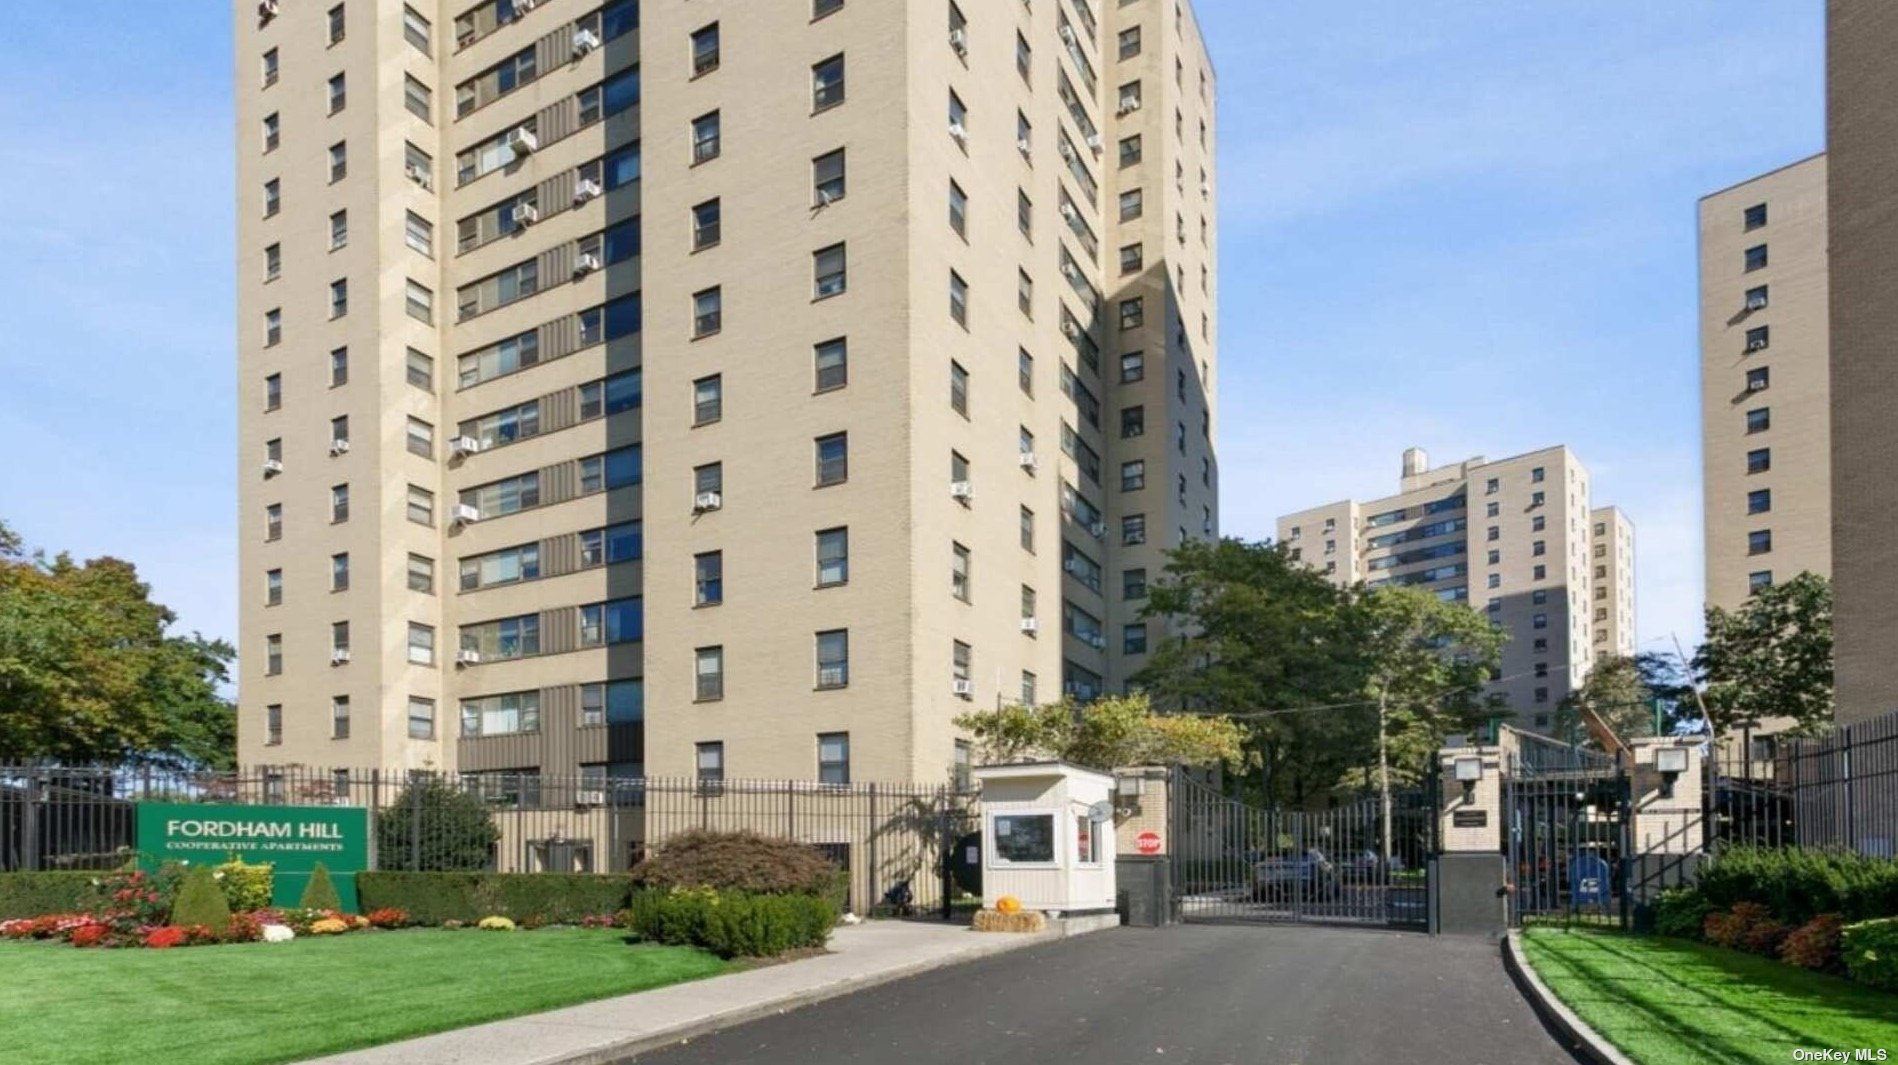 Property for Sale at 1 Fordham Oval F12, Bronx, New York - Bedrooms: 2 
Bathrooms: 1 
Rooms: 4  - $268,000